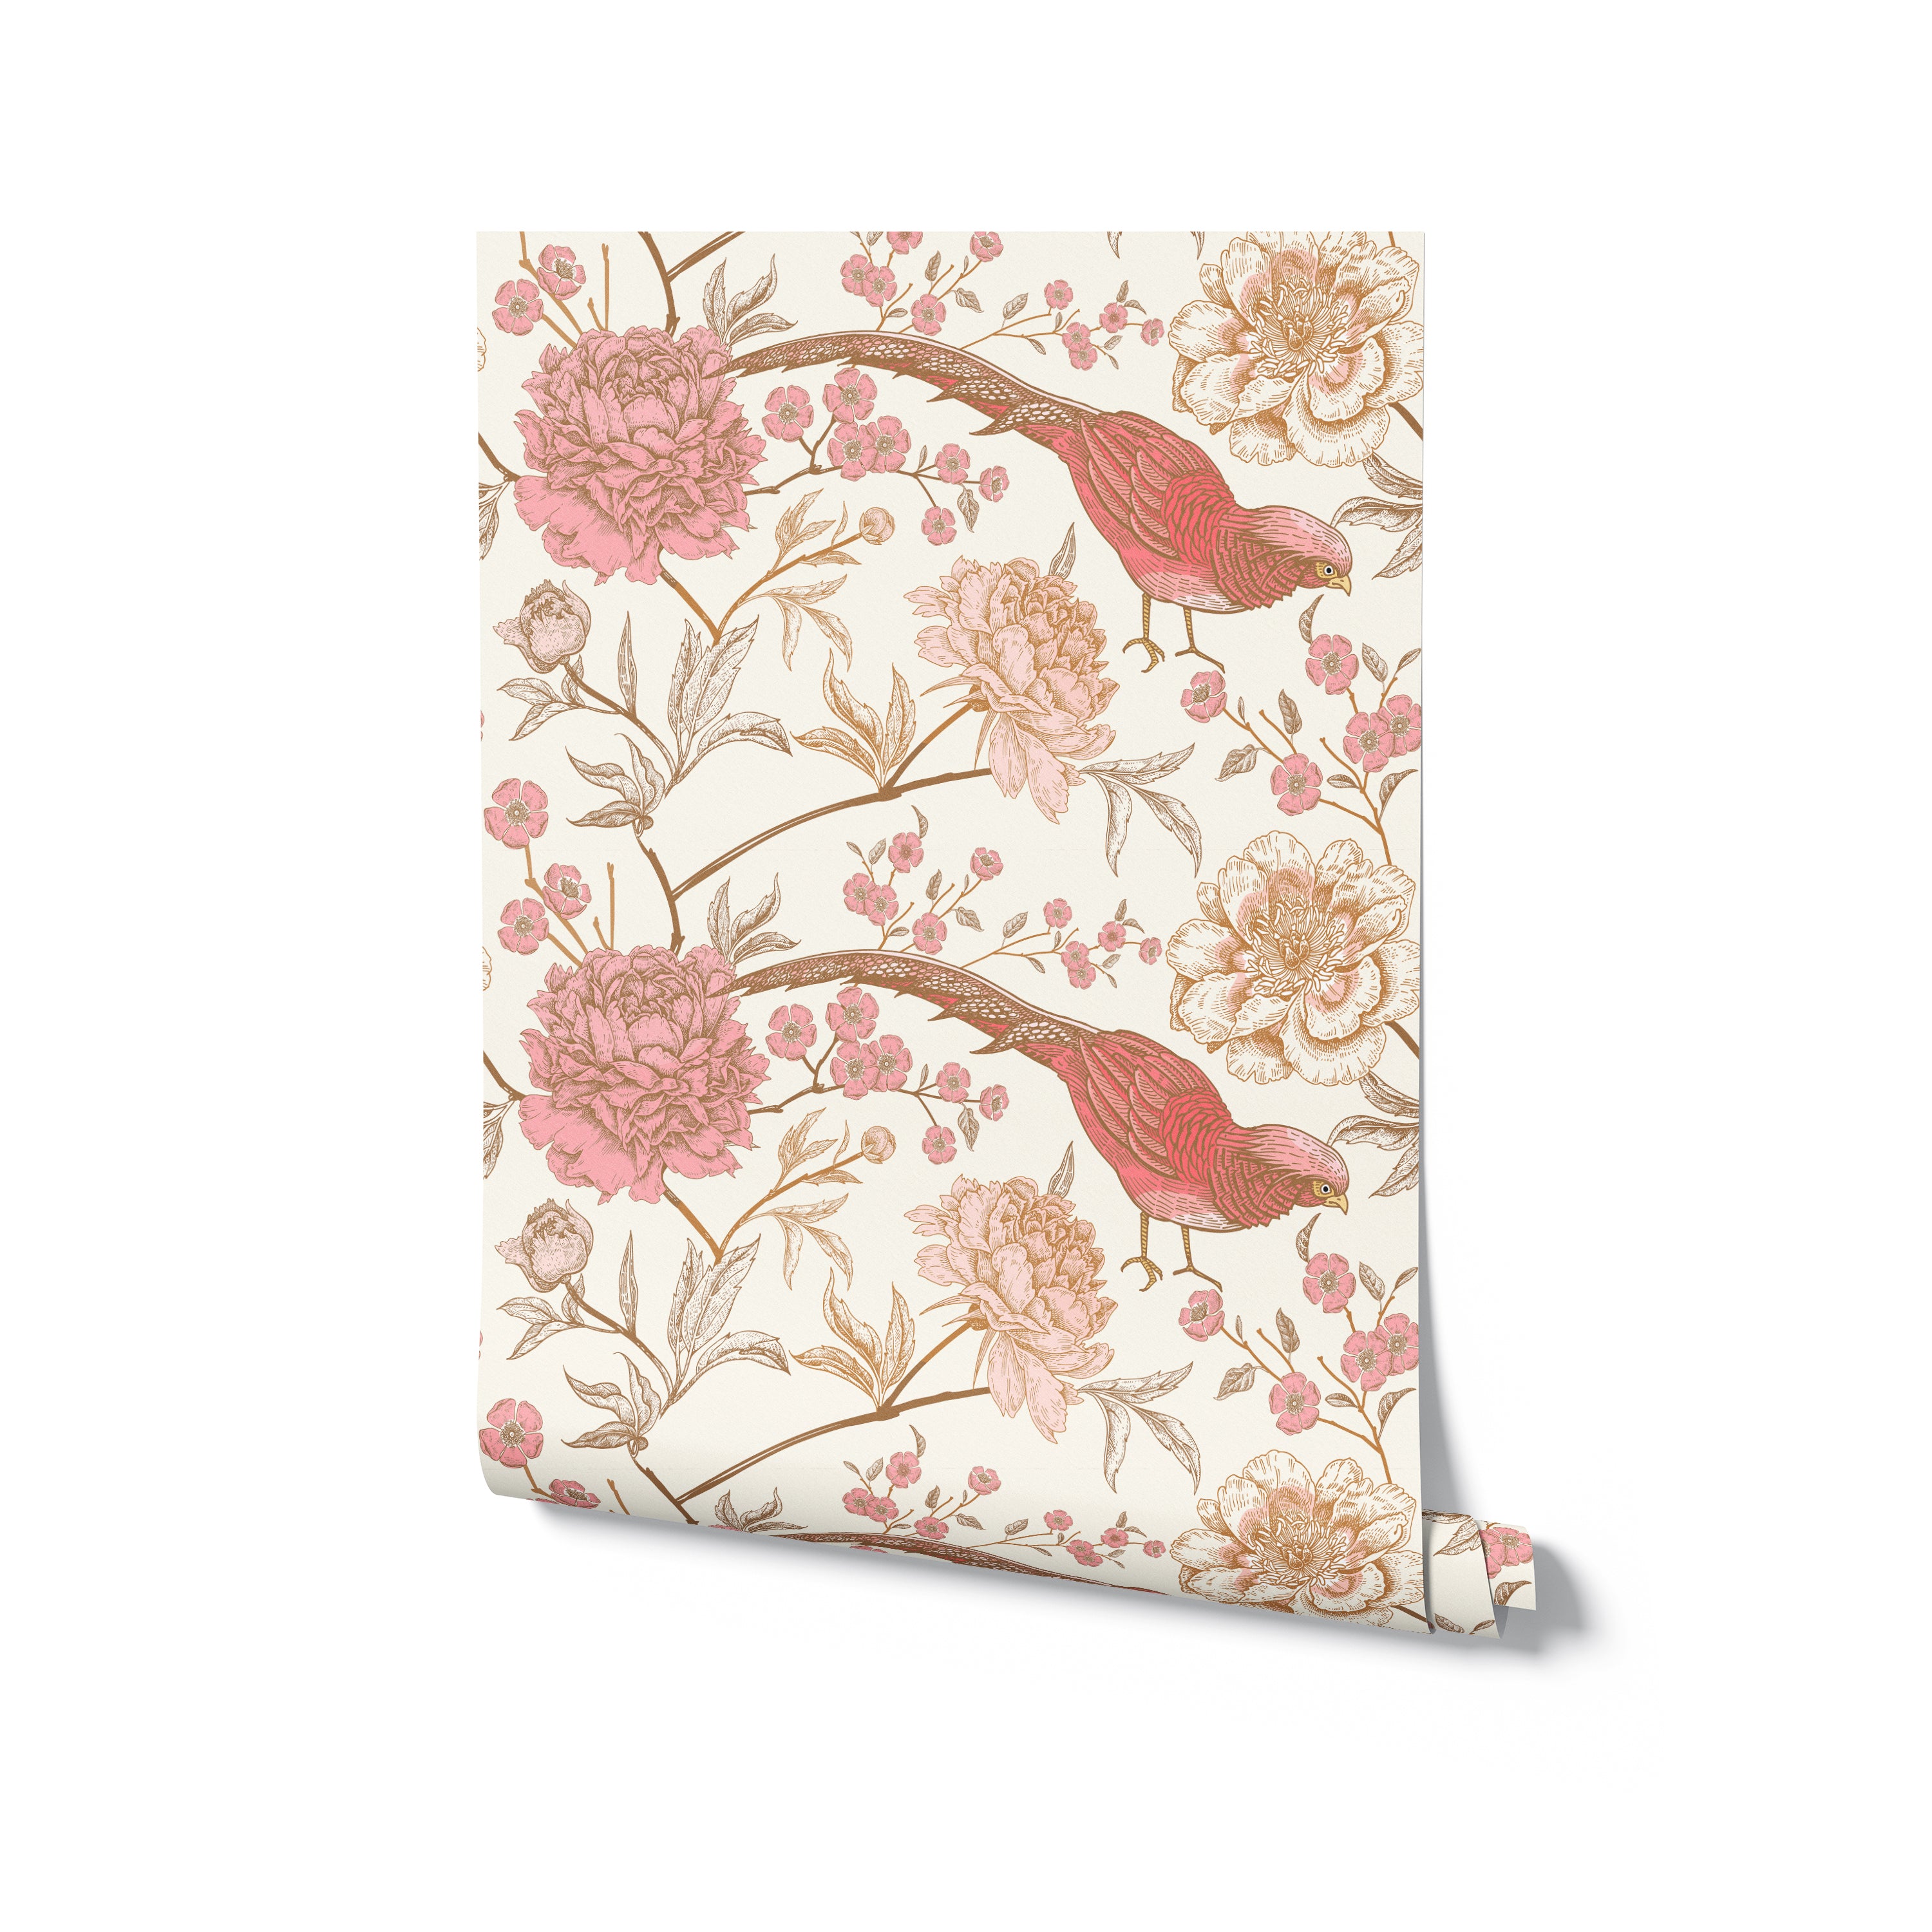 Rolled Peonies and Pheasants Wallpaper showing a detailed design of red pheasants and pink peonies on a light cream background, perfect for adding an elegant and natural touch to home decor